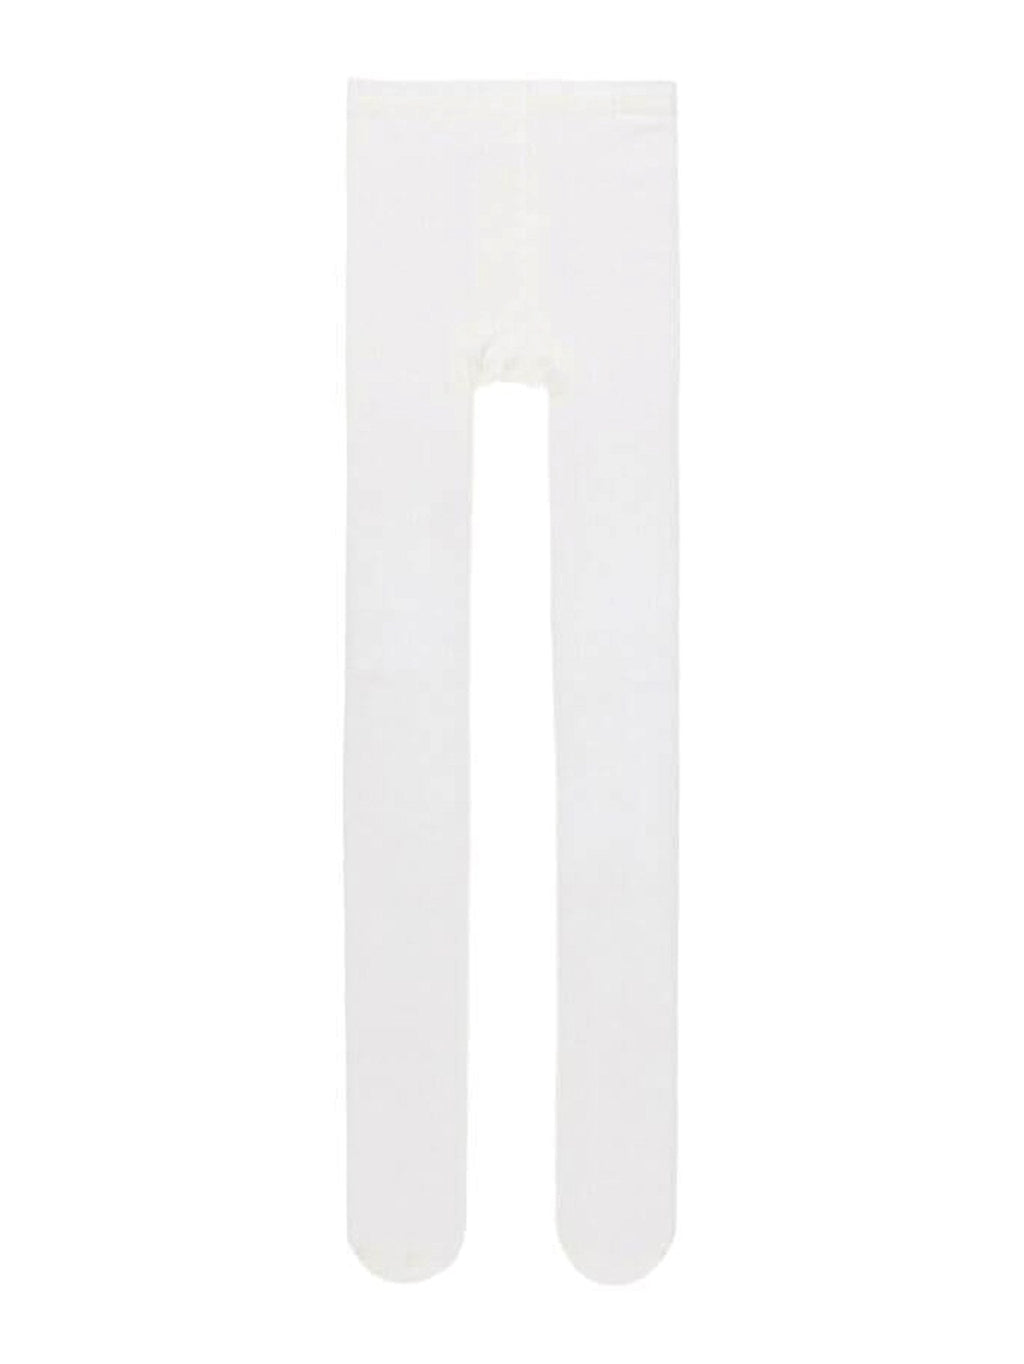 2-pack tights - White